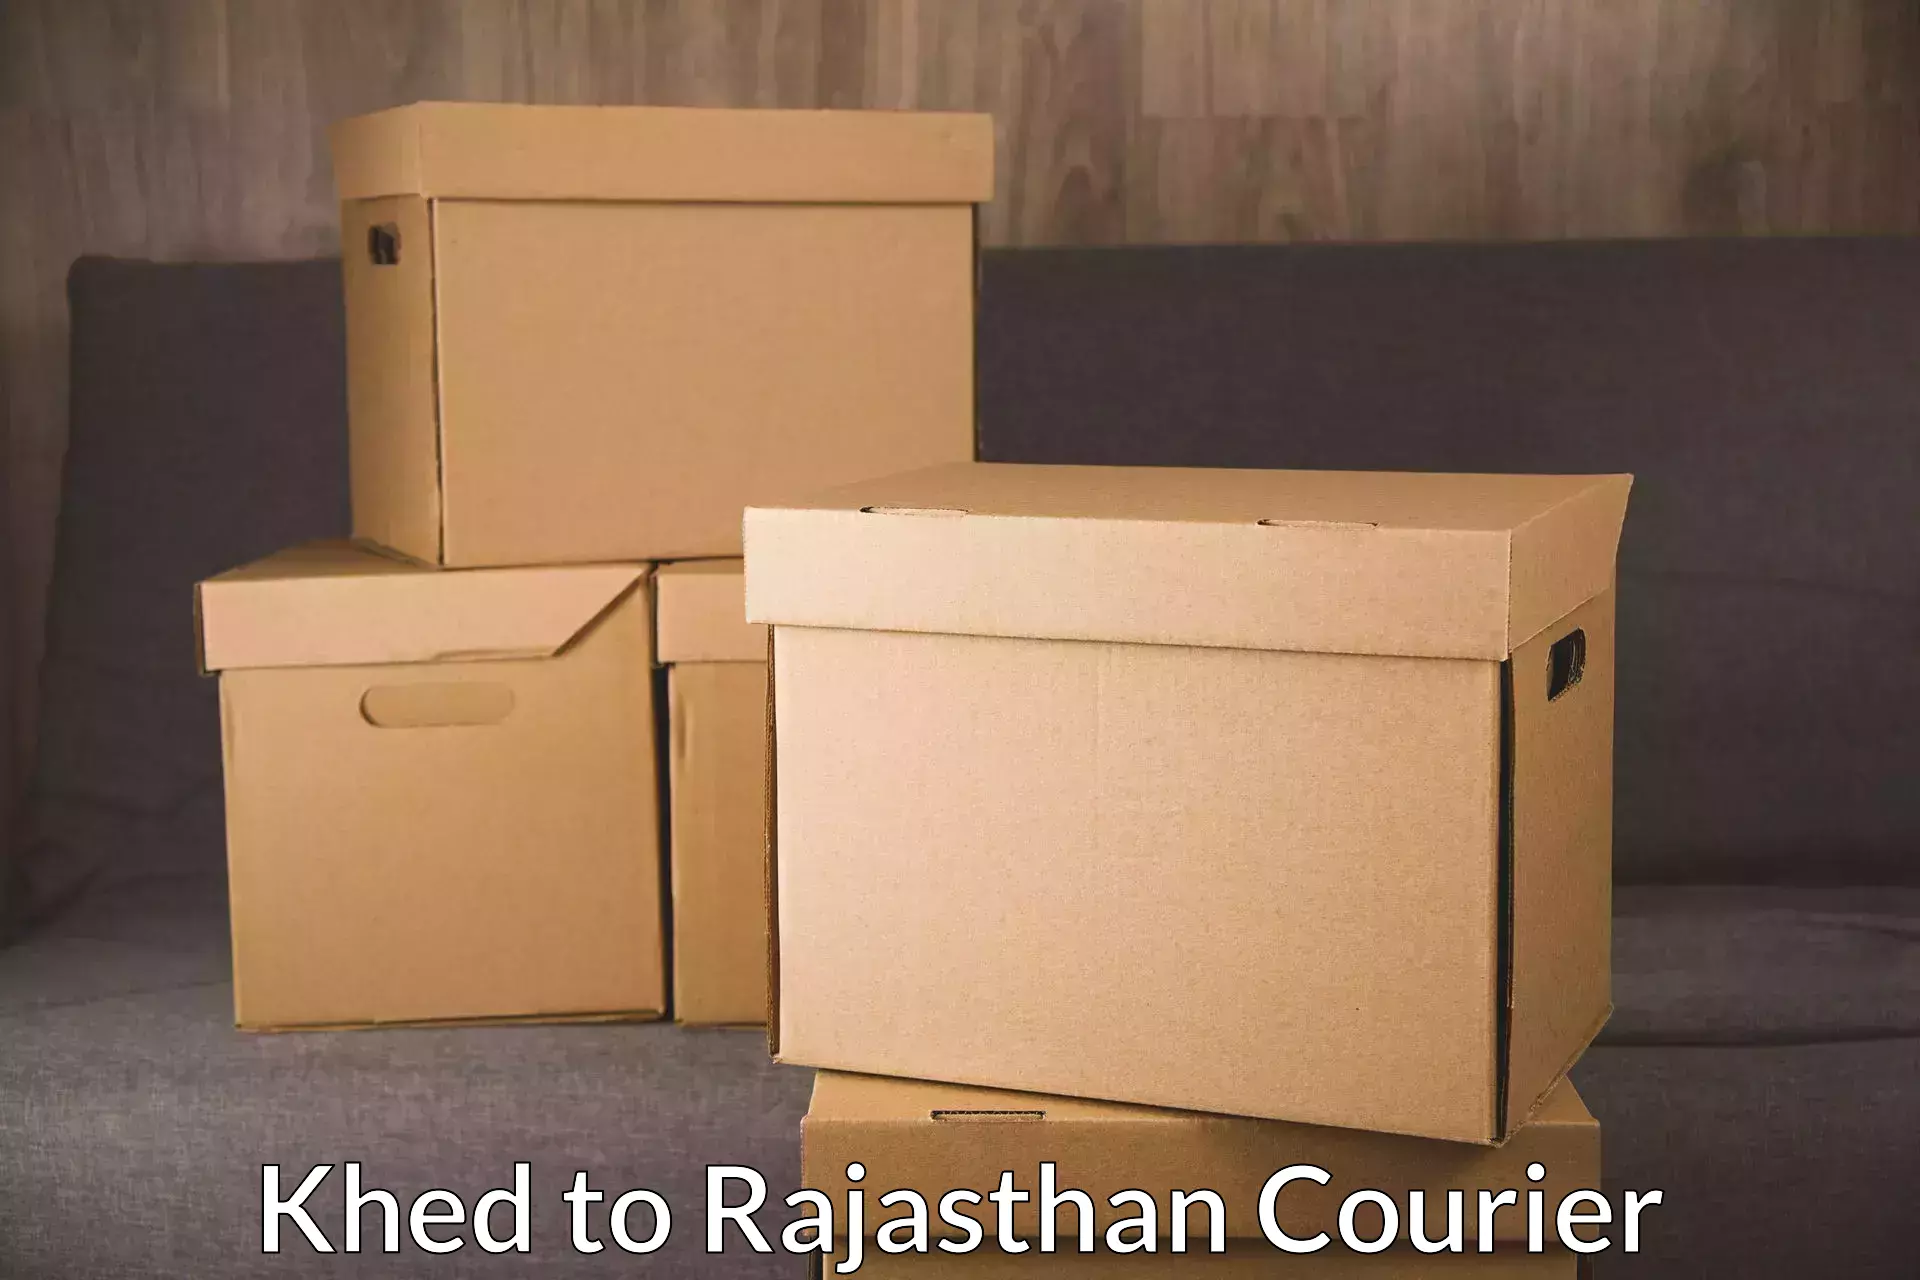 Courier service innovation Khed to Jaipur